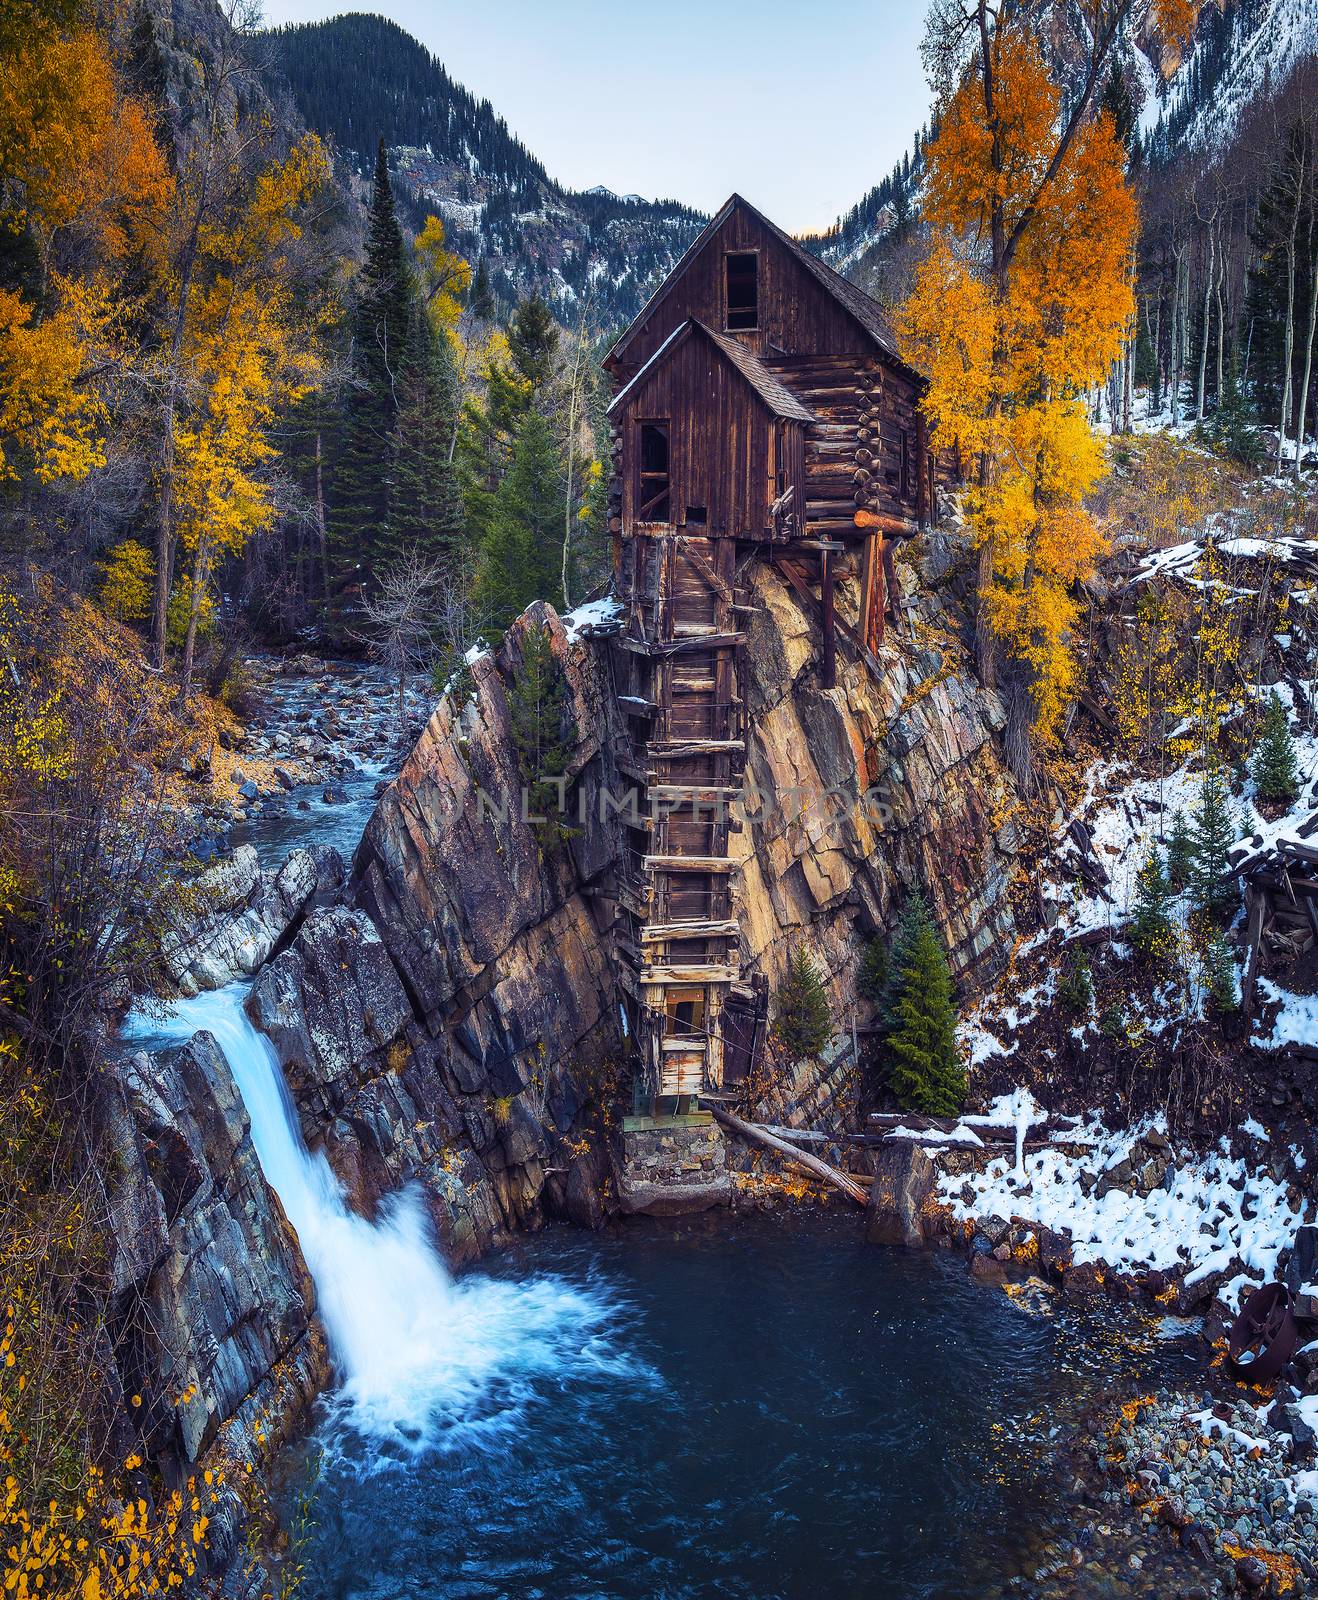 Historic wooden powerhouse called the Crystal Mill in Colorado. It is located on an outcrop above the Crystal River in Crystal ghost town and was built in 1892.